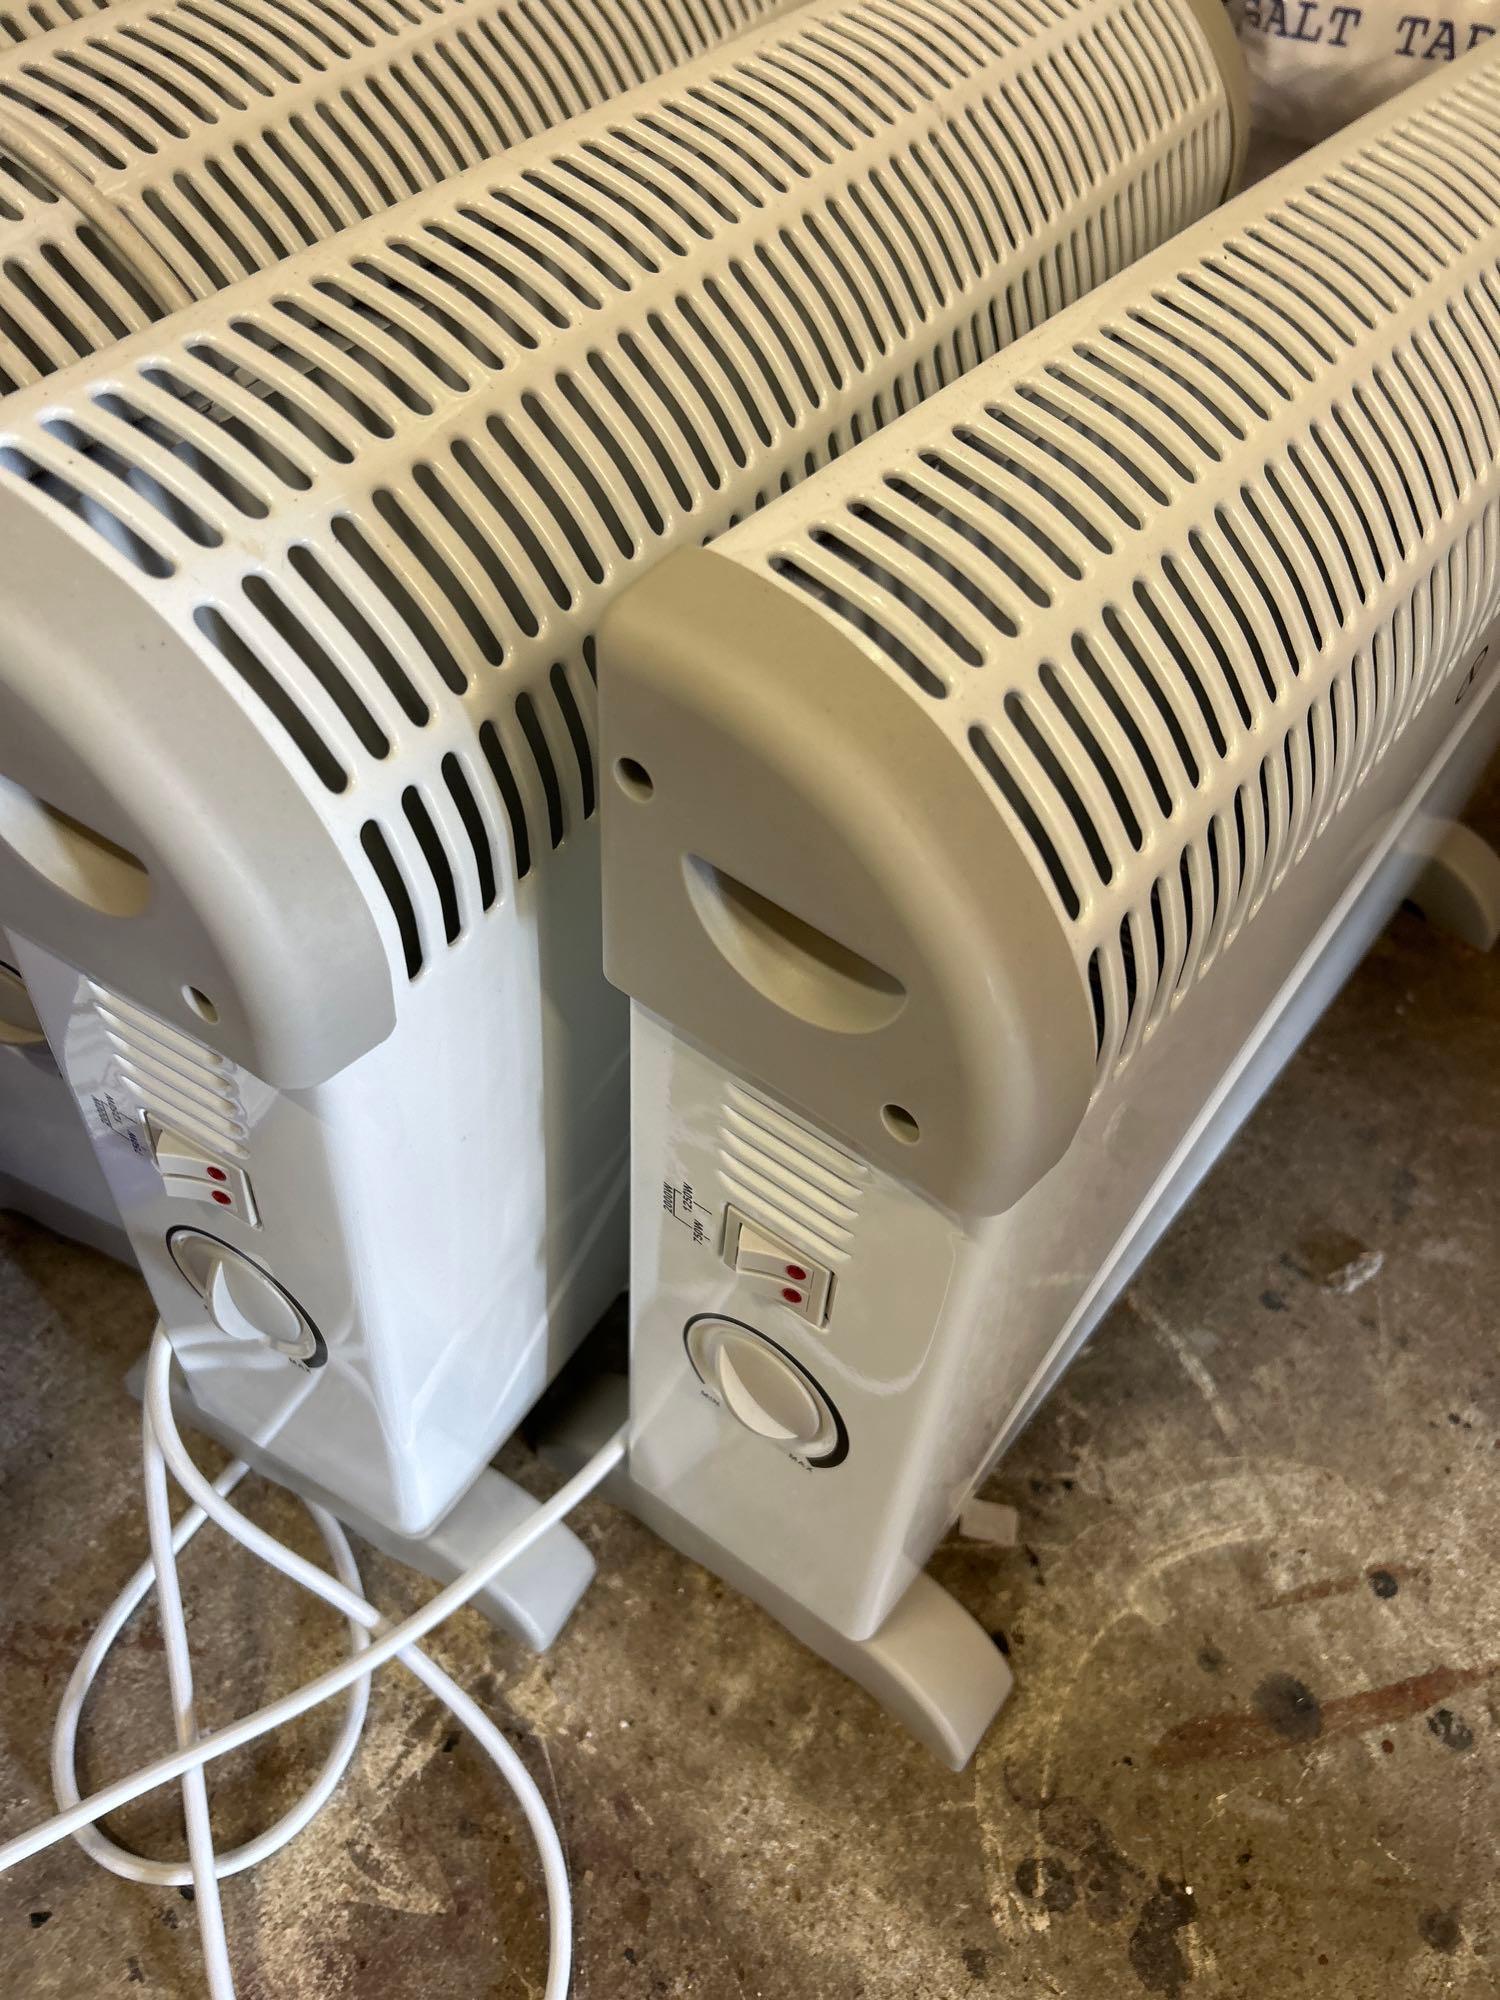 6X 2000W Convecor Heaters With Thermostat. - Image 2 of 3